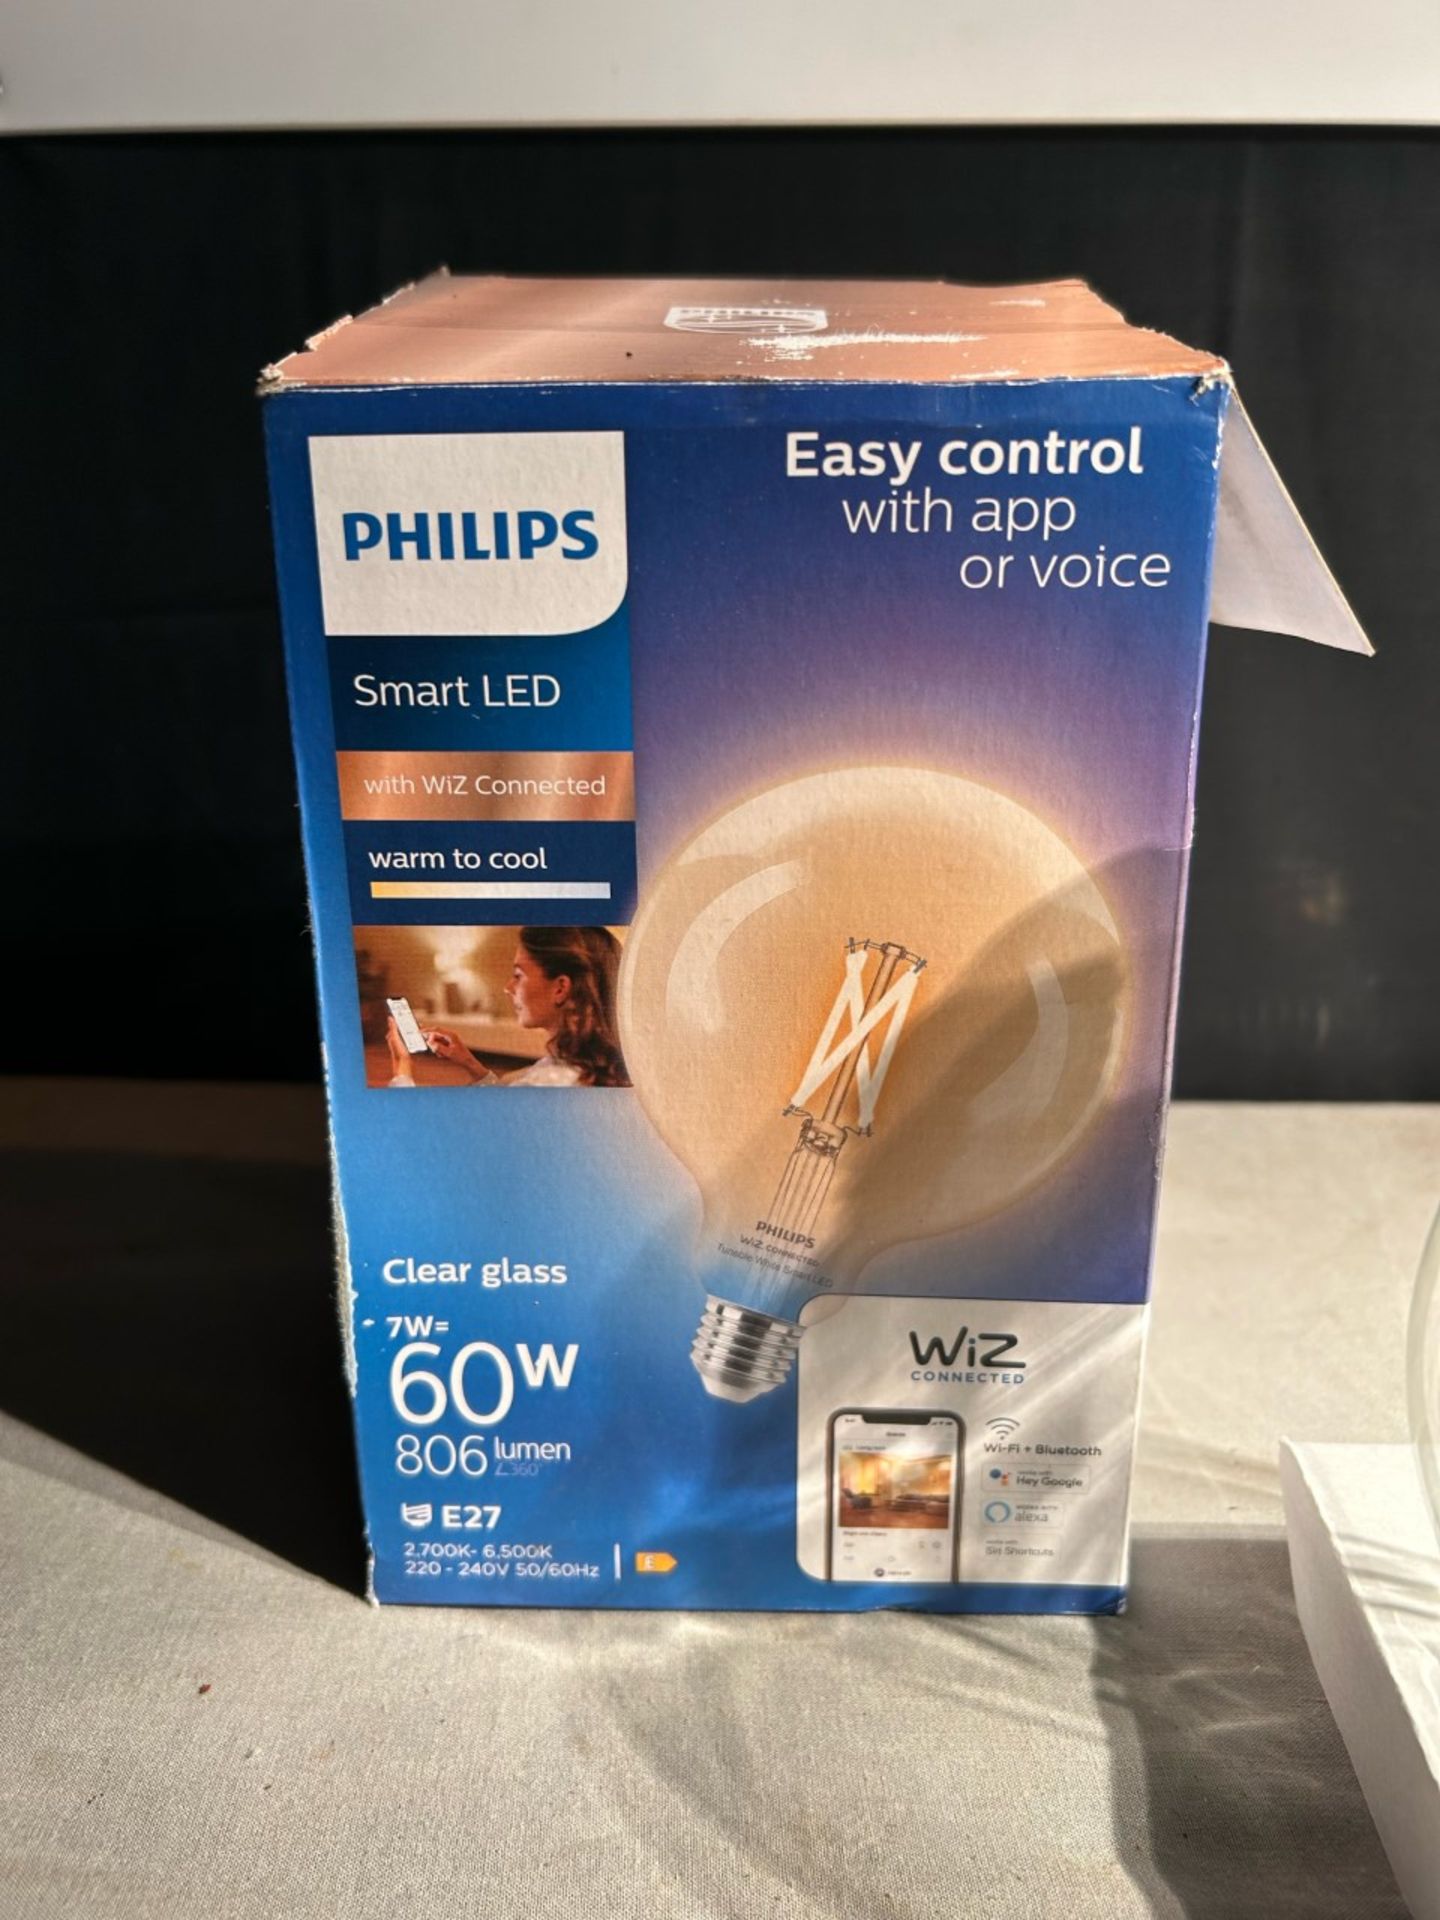 Philips smart LED bulb. Wiz connected lightbulb. Connects to wifi and controlled by app plus voice - Image 2 of 3